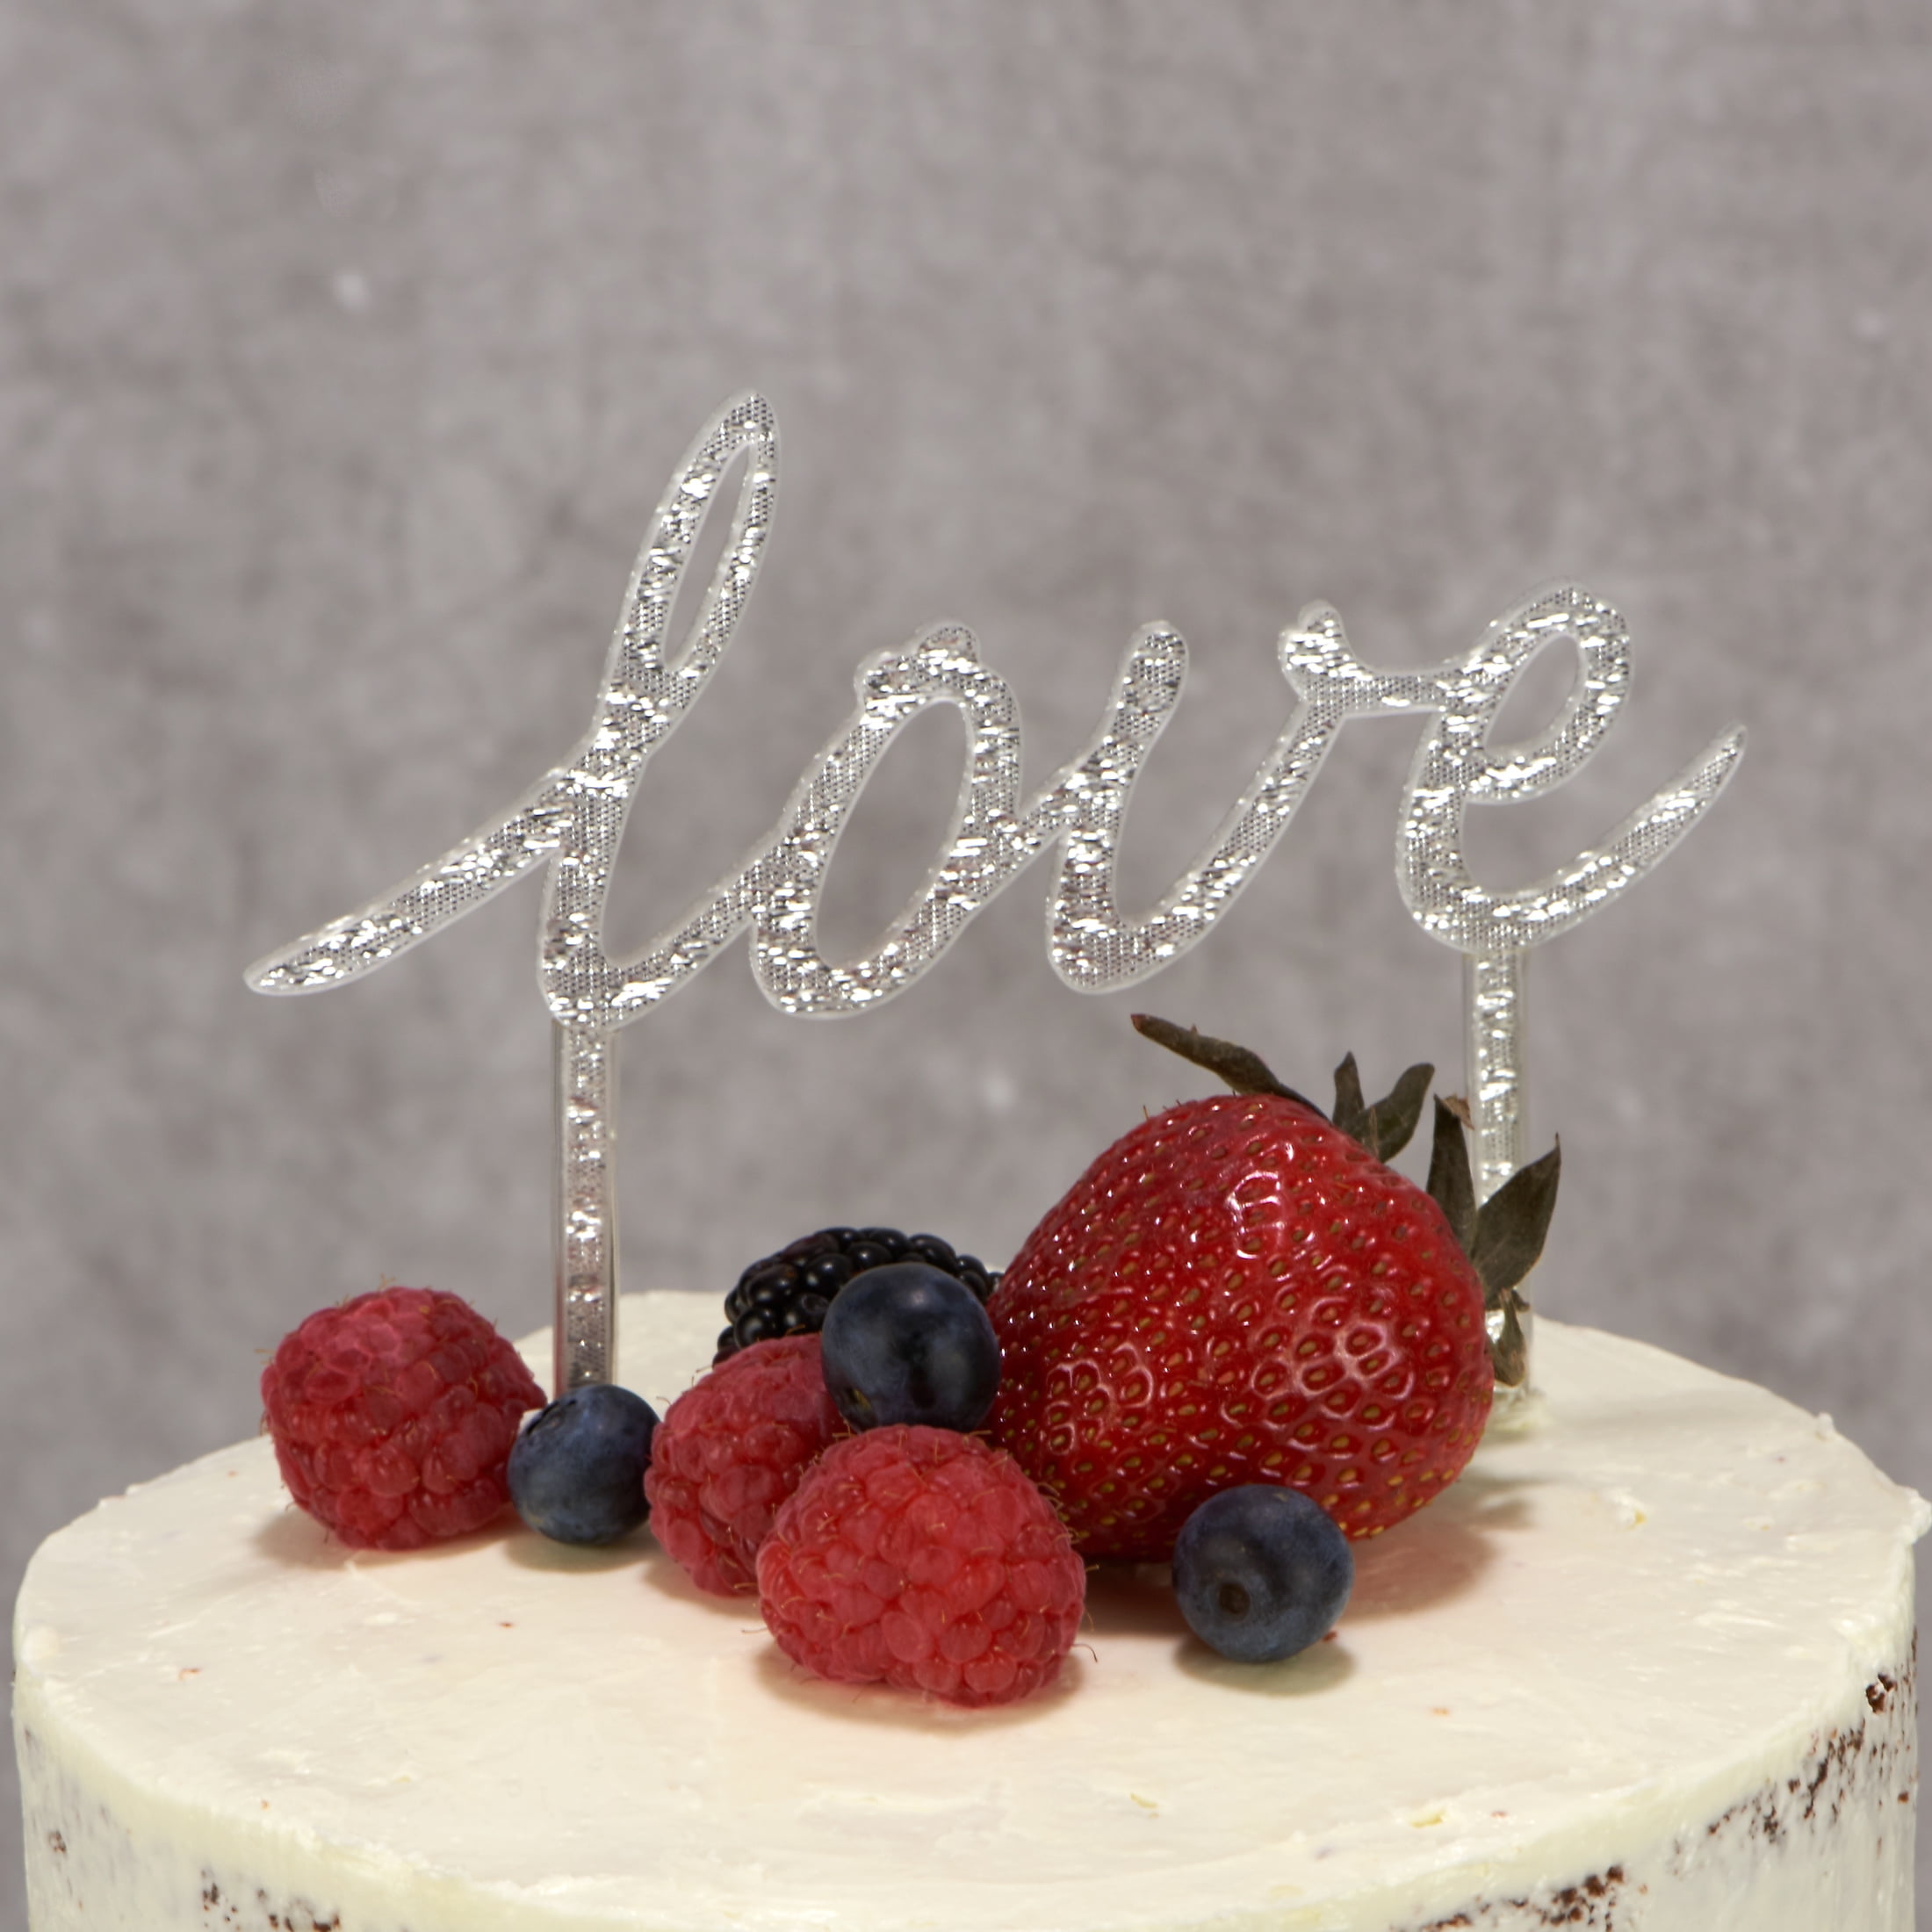 Sparkling Premium Double Sided Glitter HEART SILVER Cupcake Cake Wedding Topper